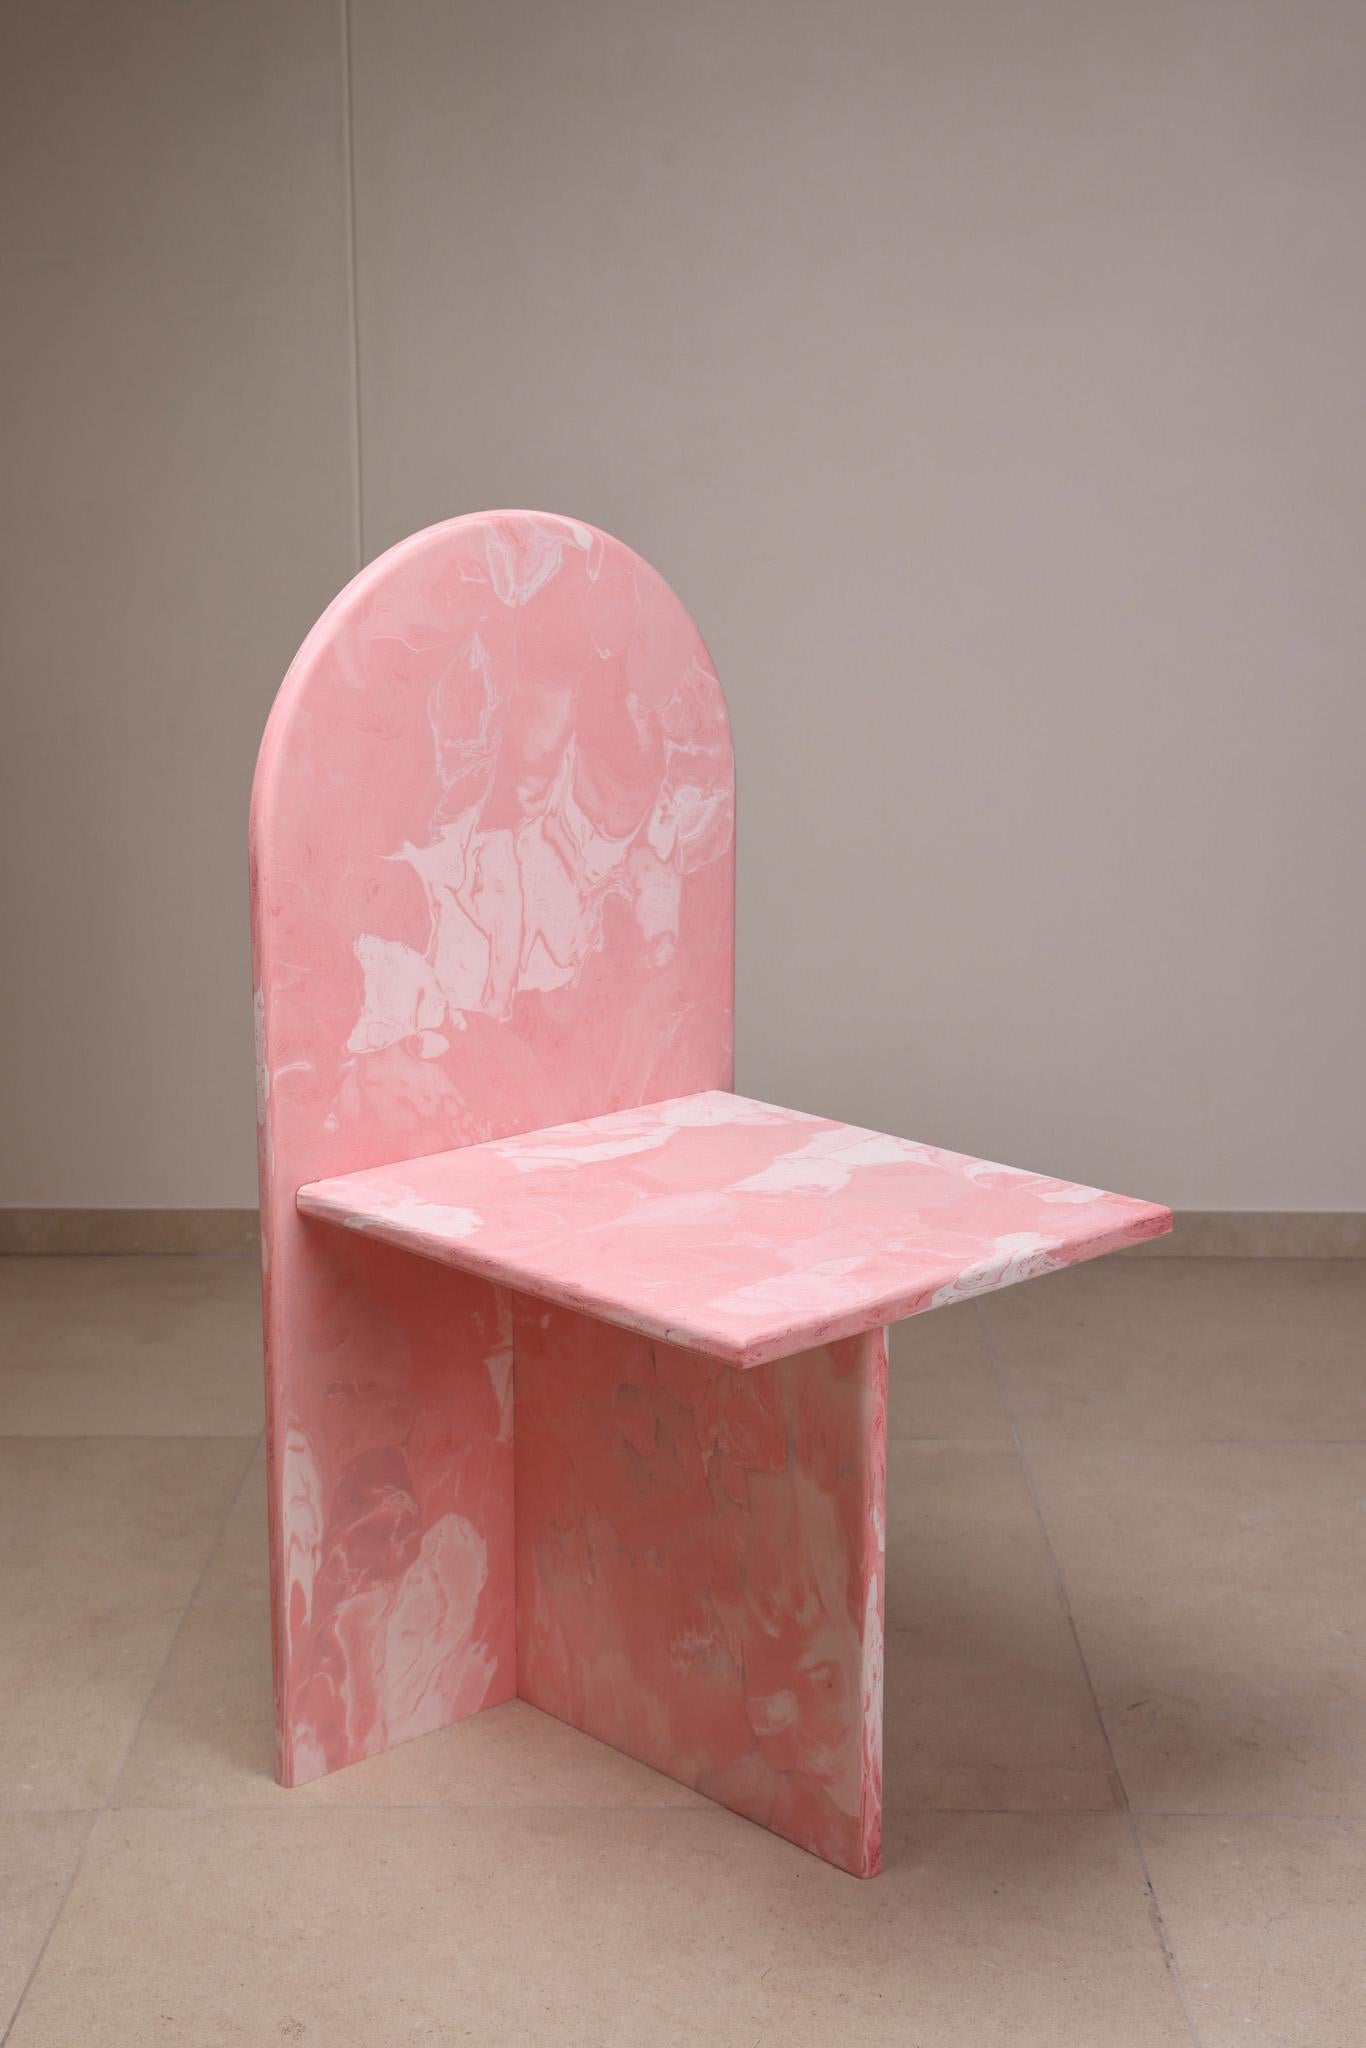 10x Contemporary Chairs Pink 100% Recycled Plastic Handcrafted by Anqa Studios For Sale 2